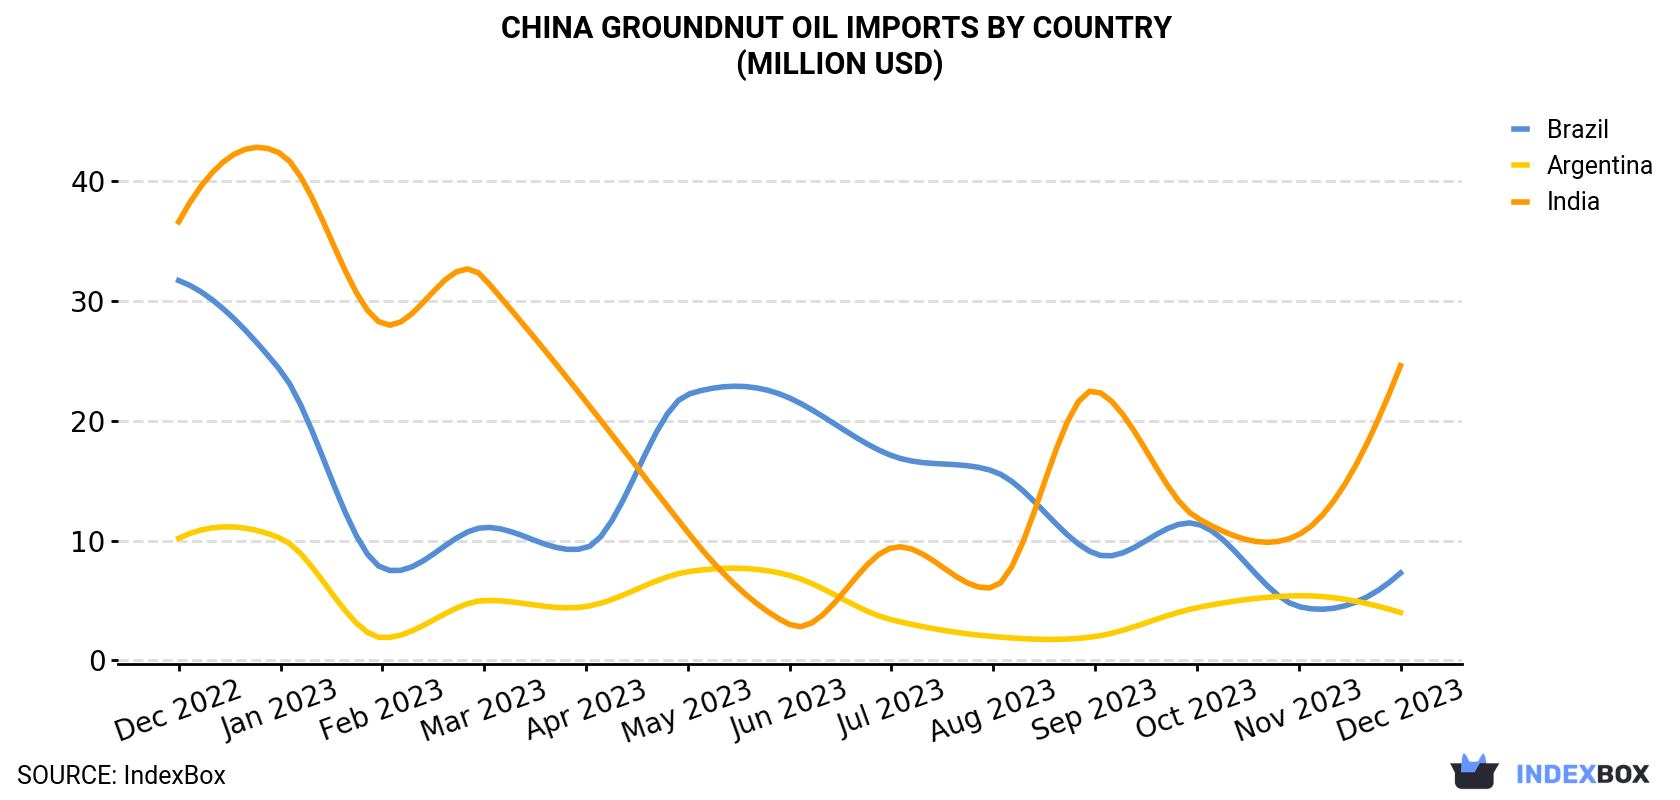 China Groundnut Oil Imports By Country (Million USD)